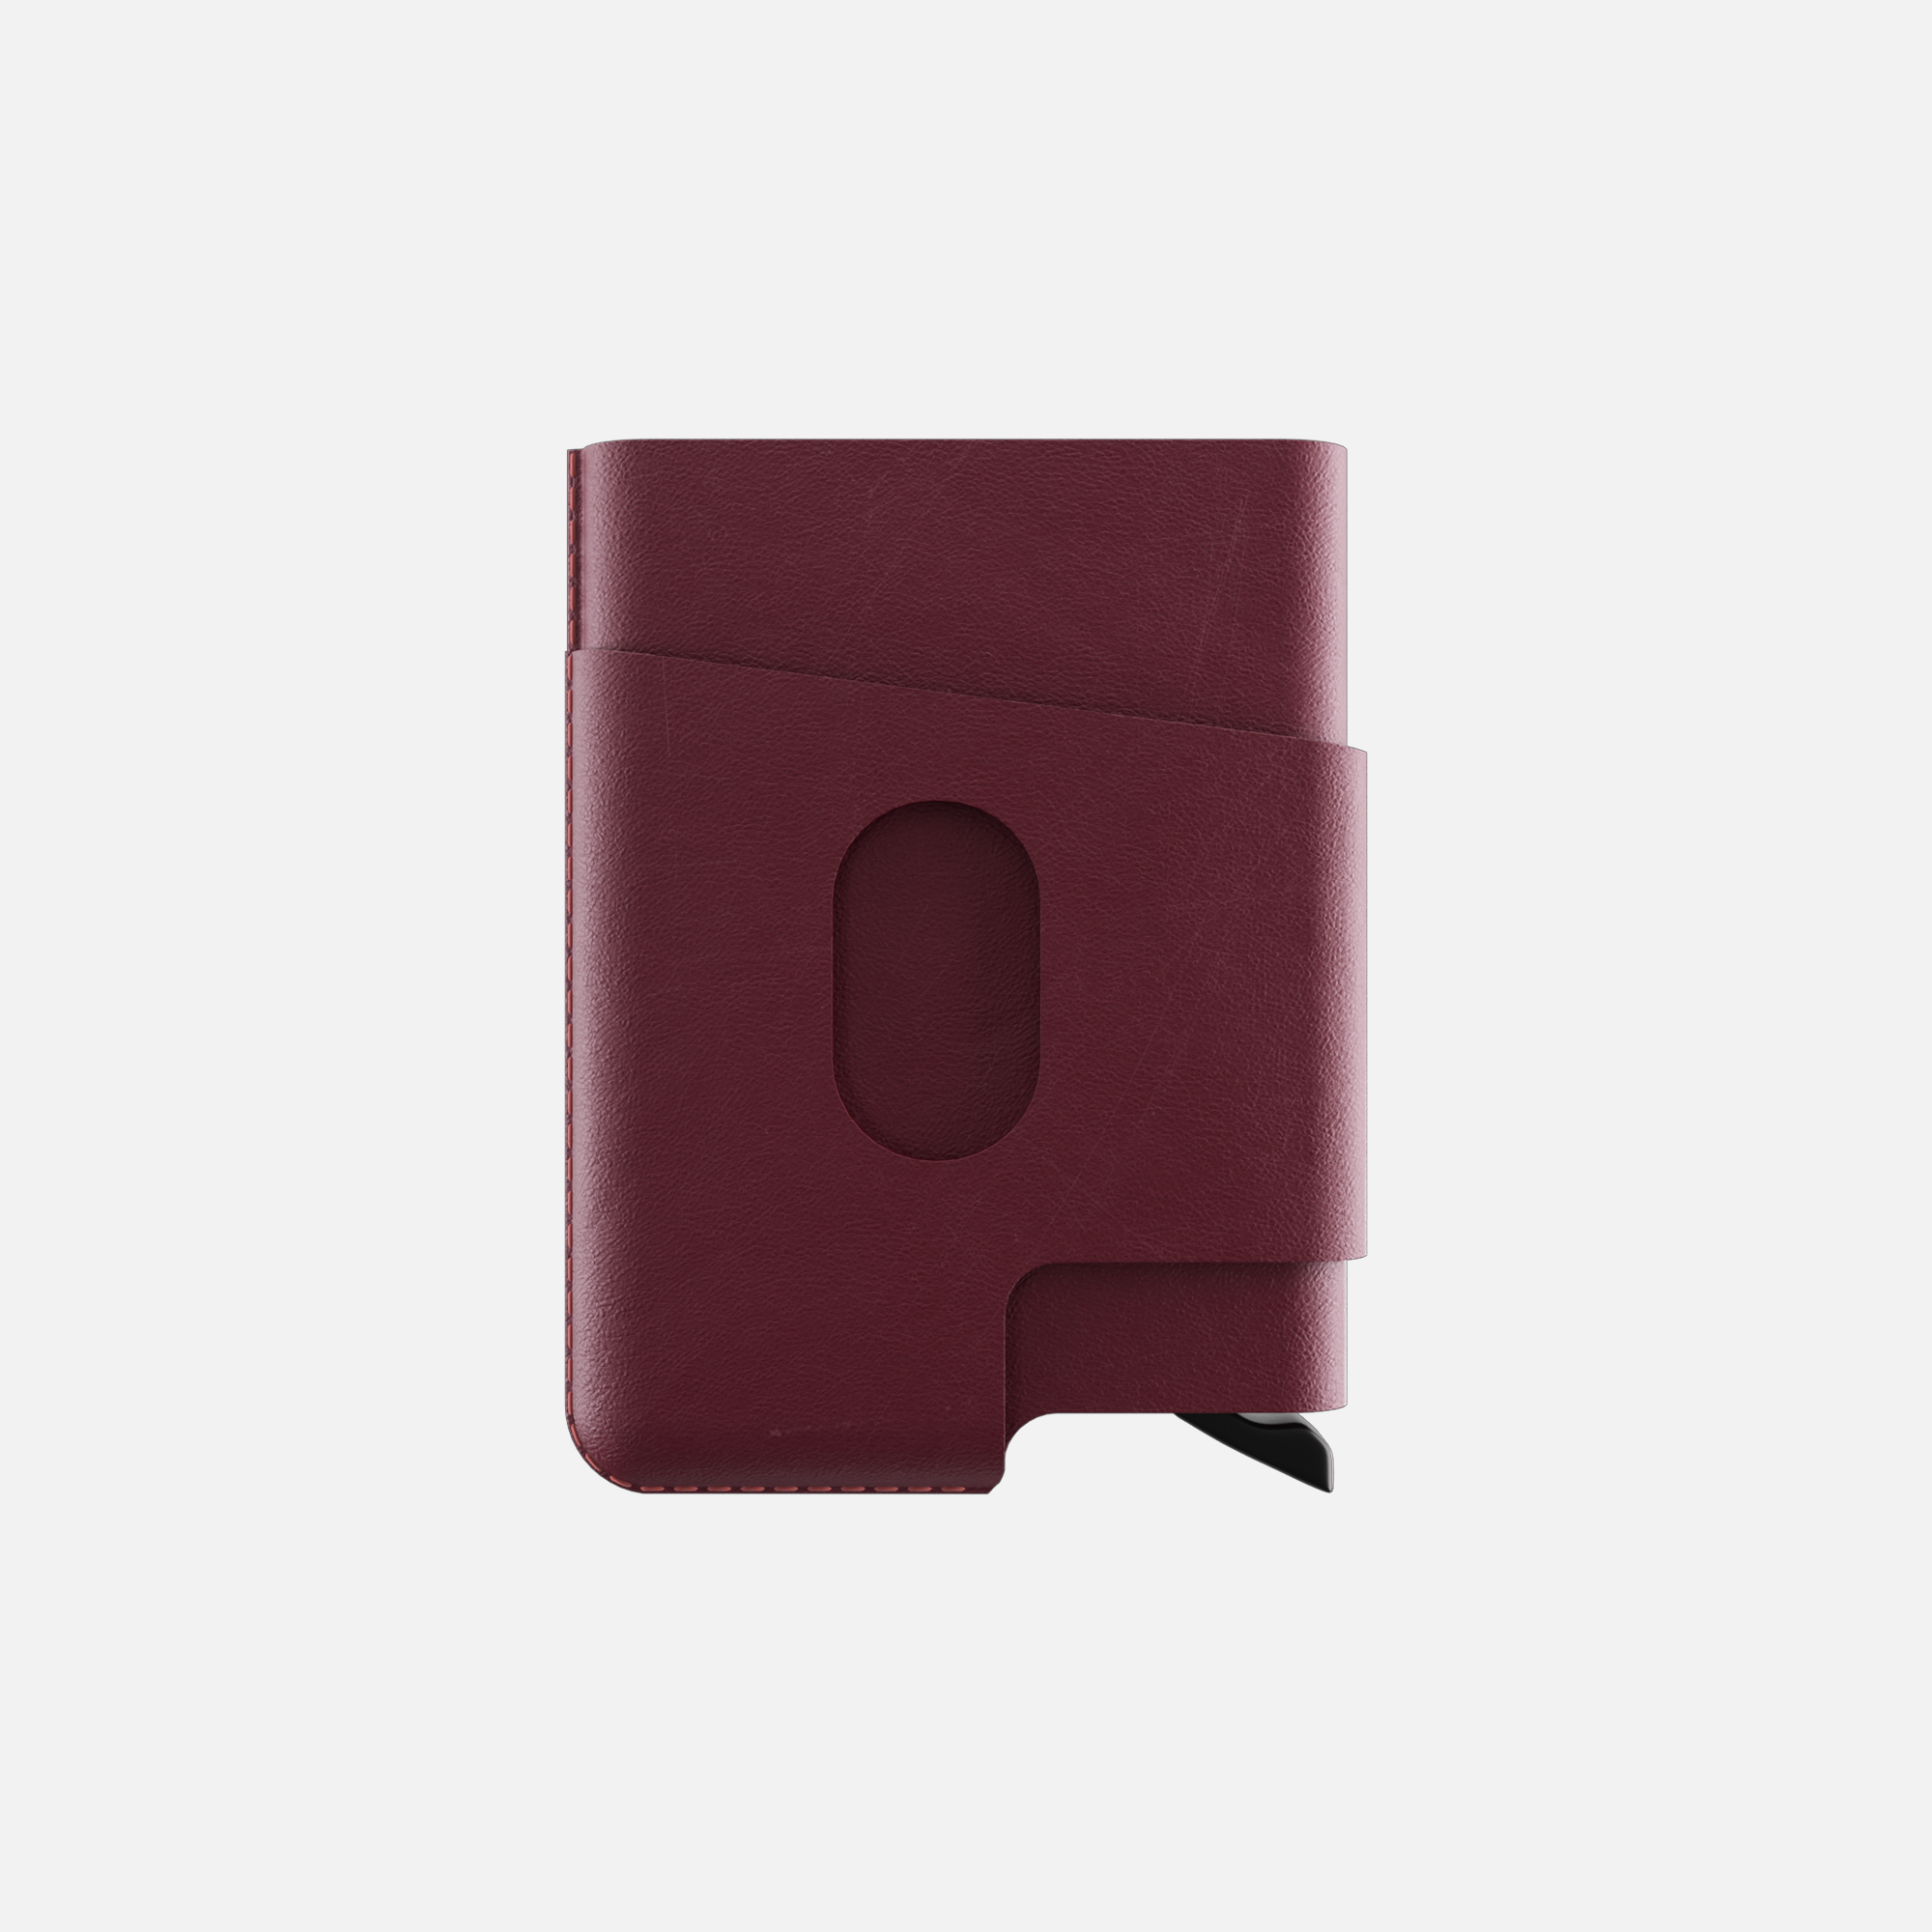 Burgundy leather cardholder wallet with strap closure isolated on white background.